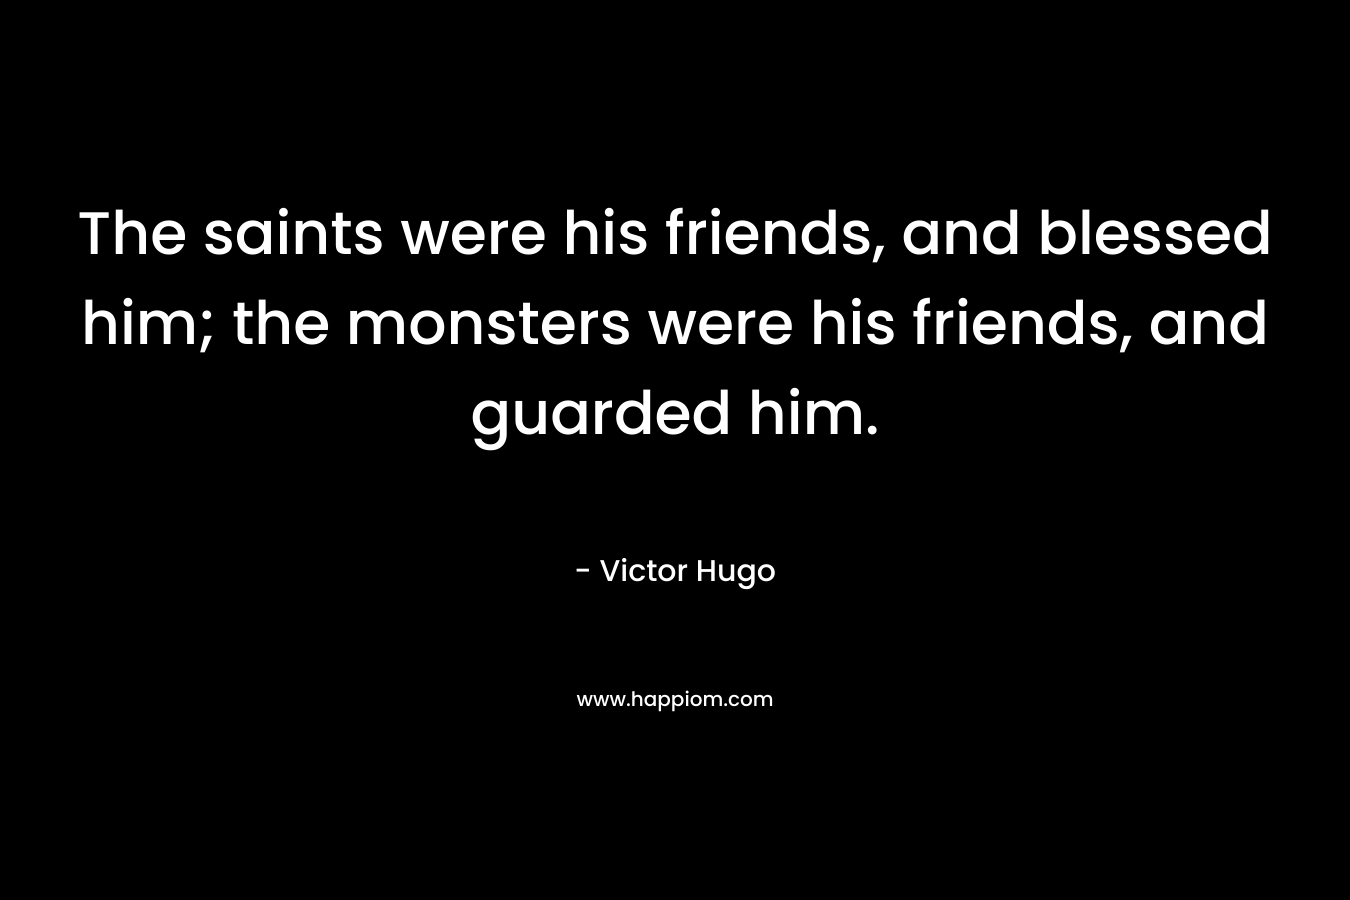 The saints were his friends, and blessed him; the monsters were his friends, and guarded him.